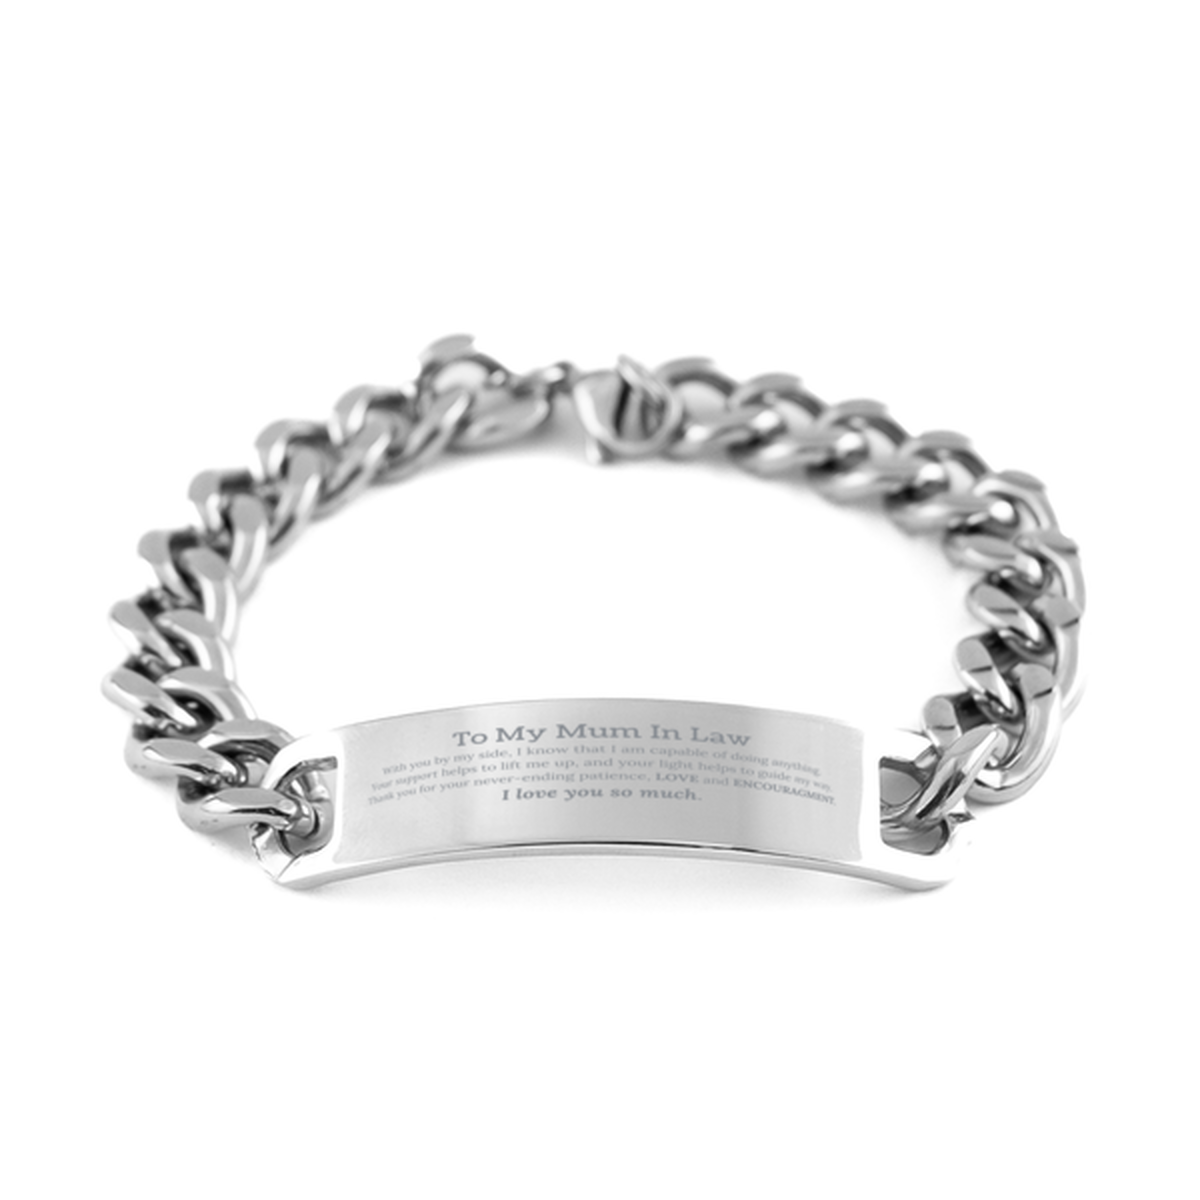 Appreciation Mum In Law  Cuban Chain Stainless Steel Bracelet Gifts, To My Mum In Law  Birthday Christmas Wedding Keepsake Gifts for Mum In Law  With you by my side, I know that I am capable of doing anything. I love you so much